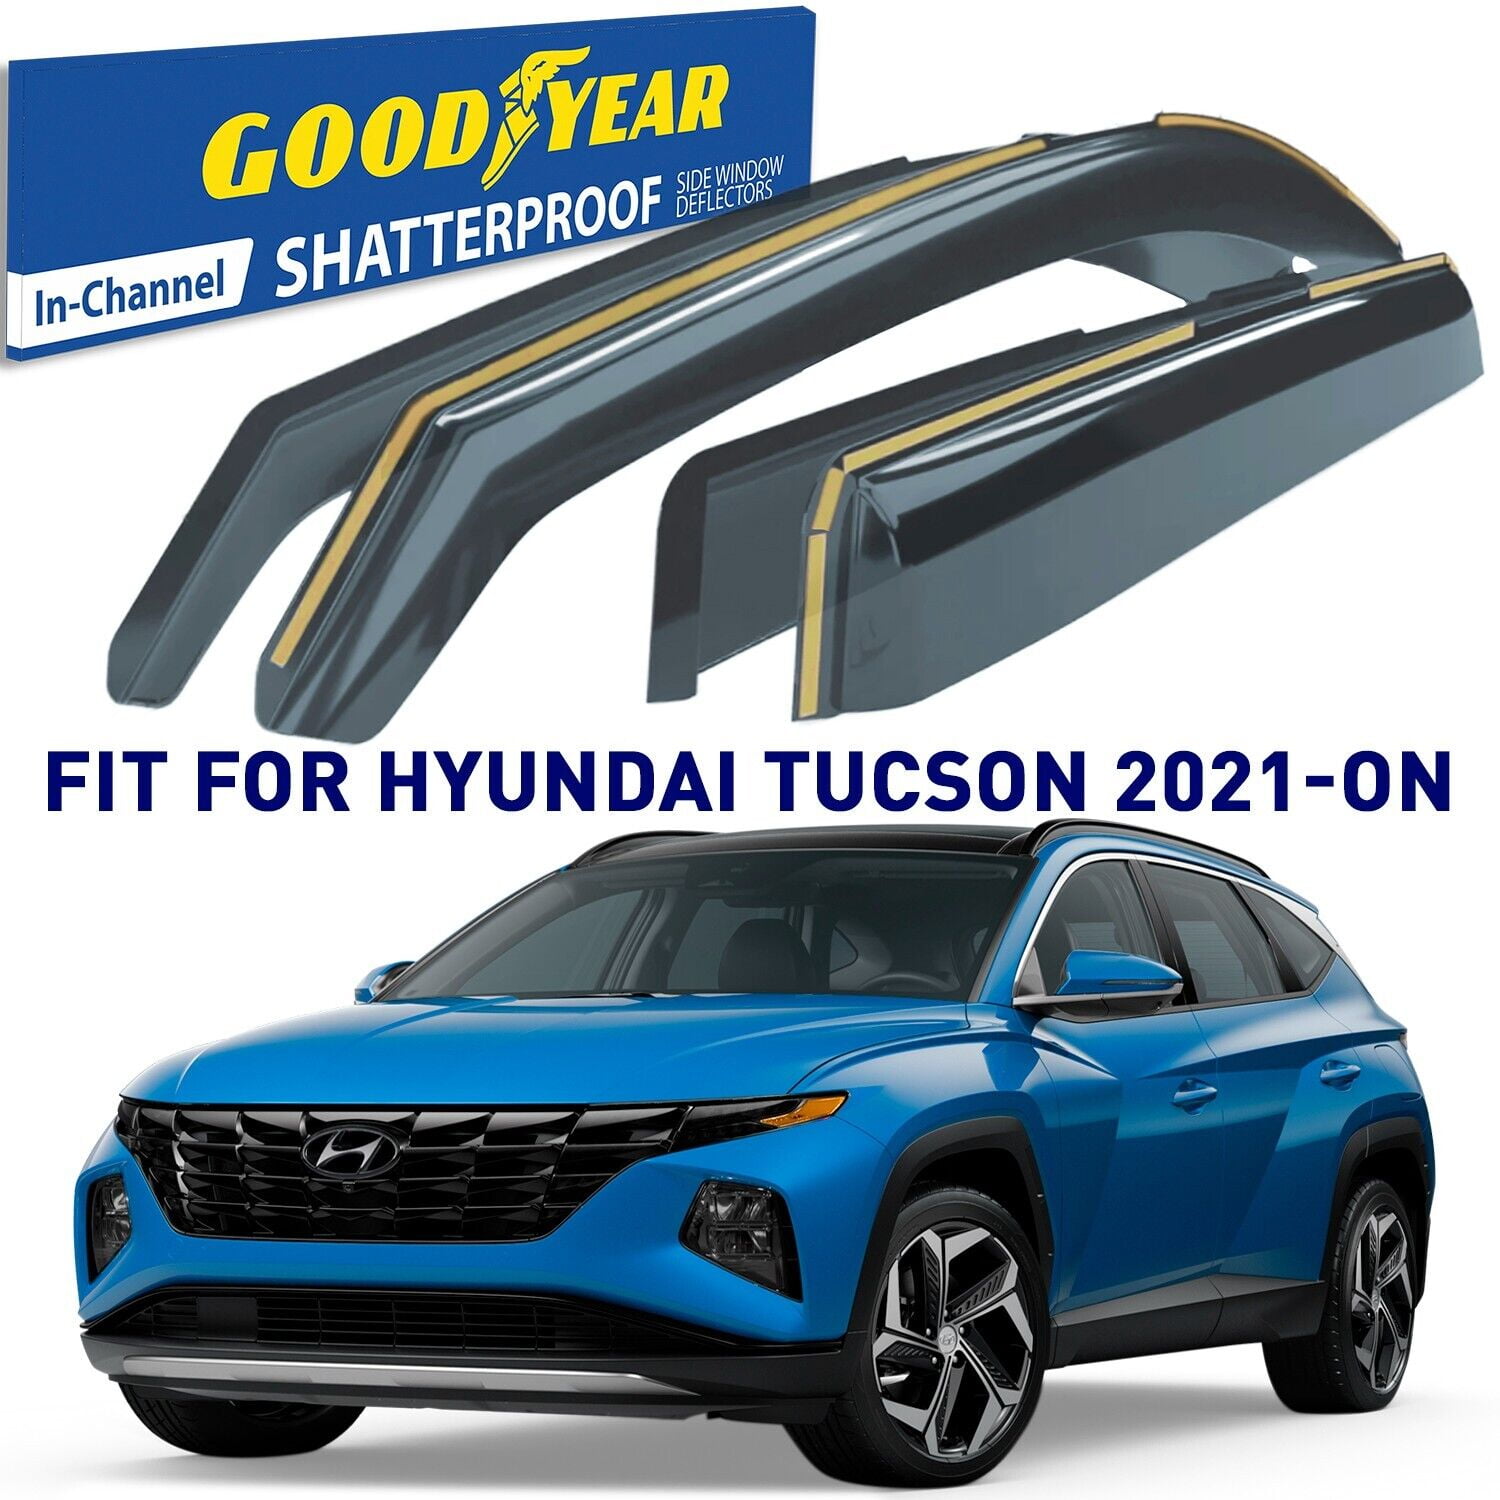 Goodyear Shatterproof in-Channel Window Deflectors for Hyundai Tucson  2021-2024, Rain Guards, Window Visors for Cars, Vent Deflector, Car  Accessories, 4 pcs - GY003485 